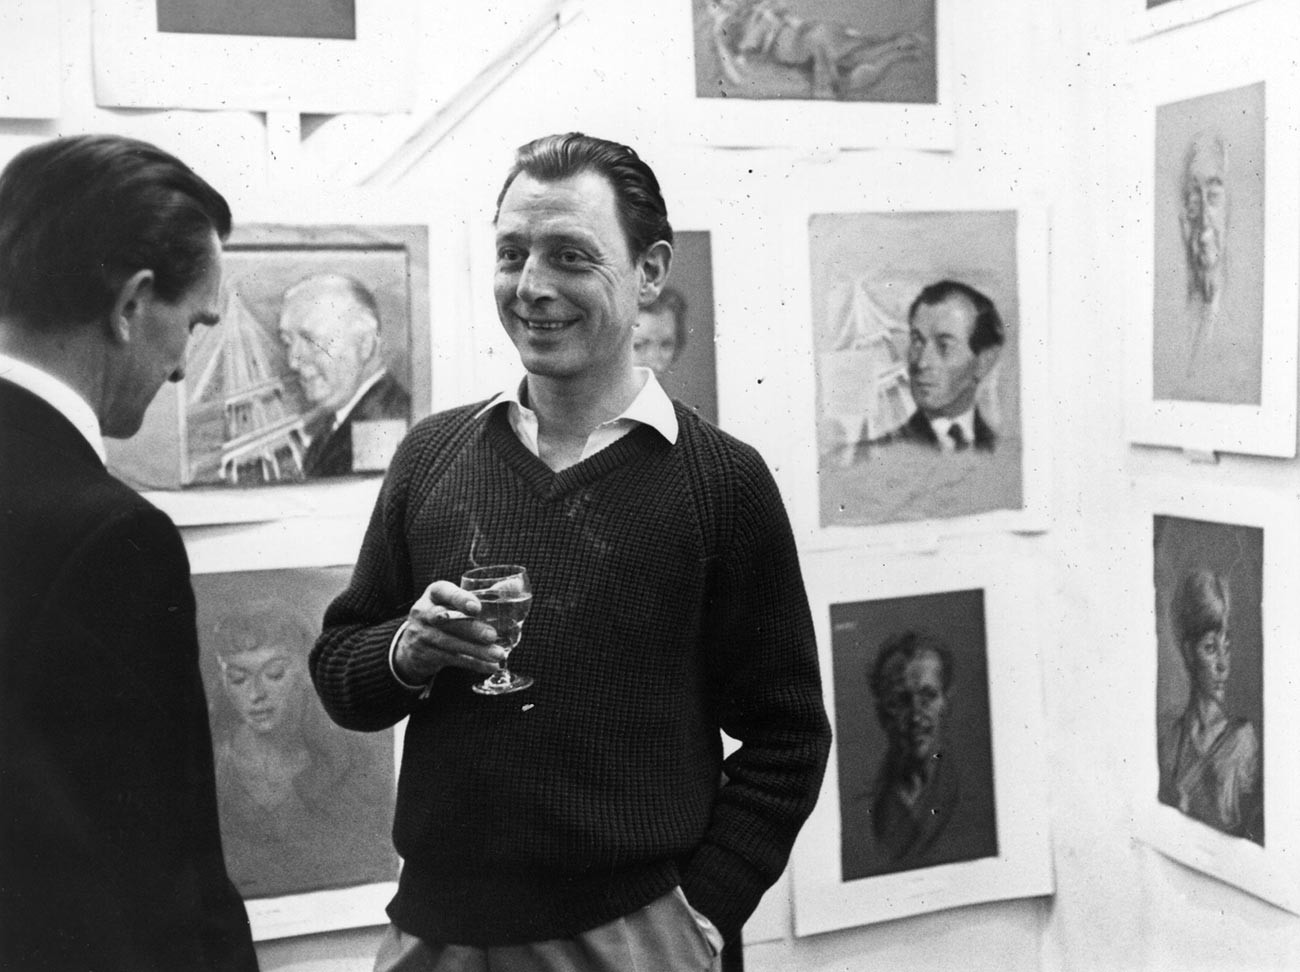 Dr Stephen Ward, the society osteopath involved in the Profumo Affair, at an art gallery.